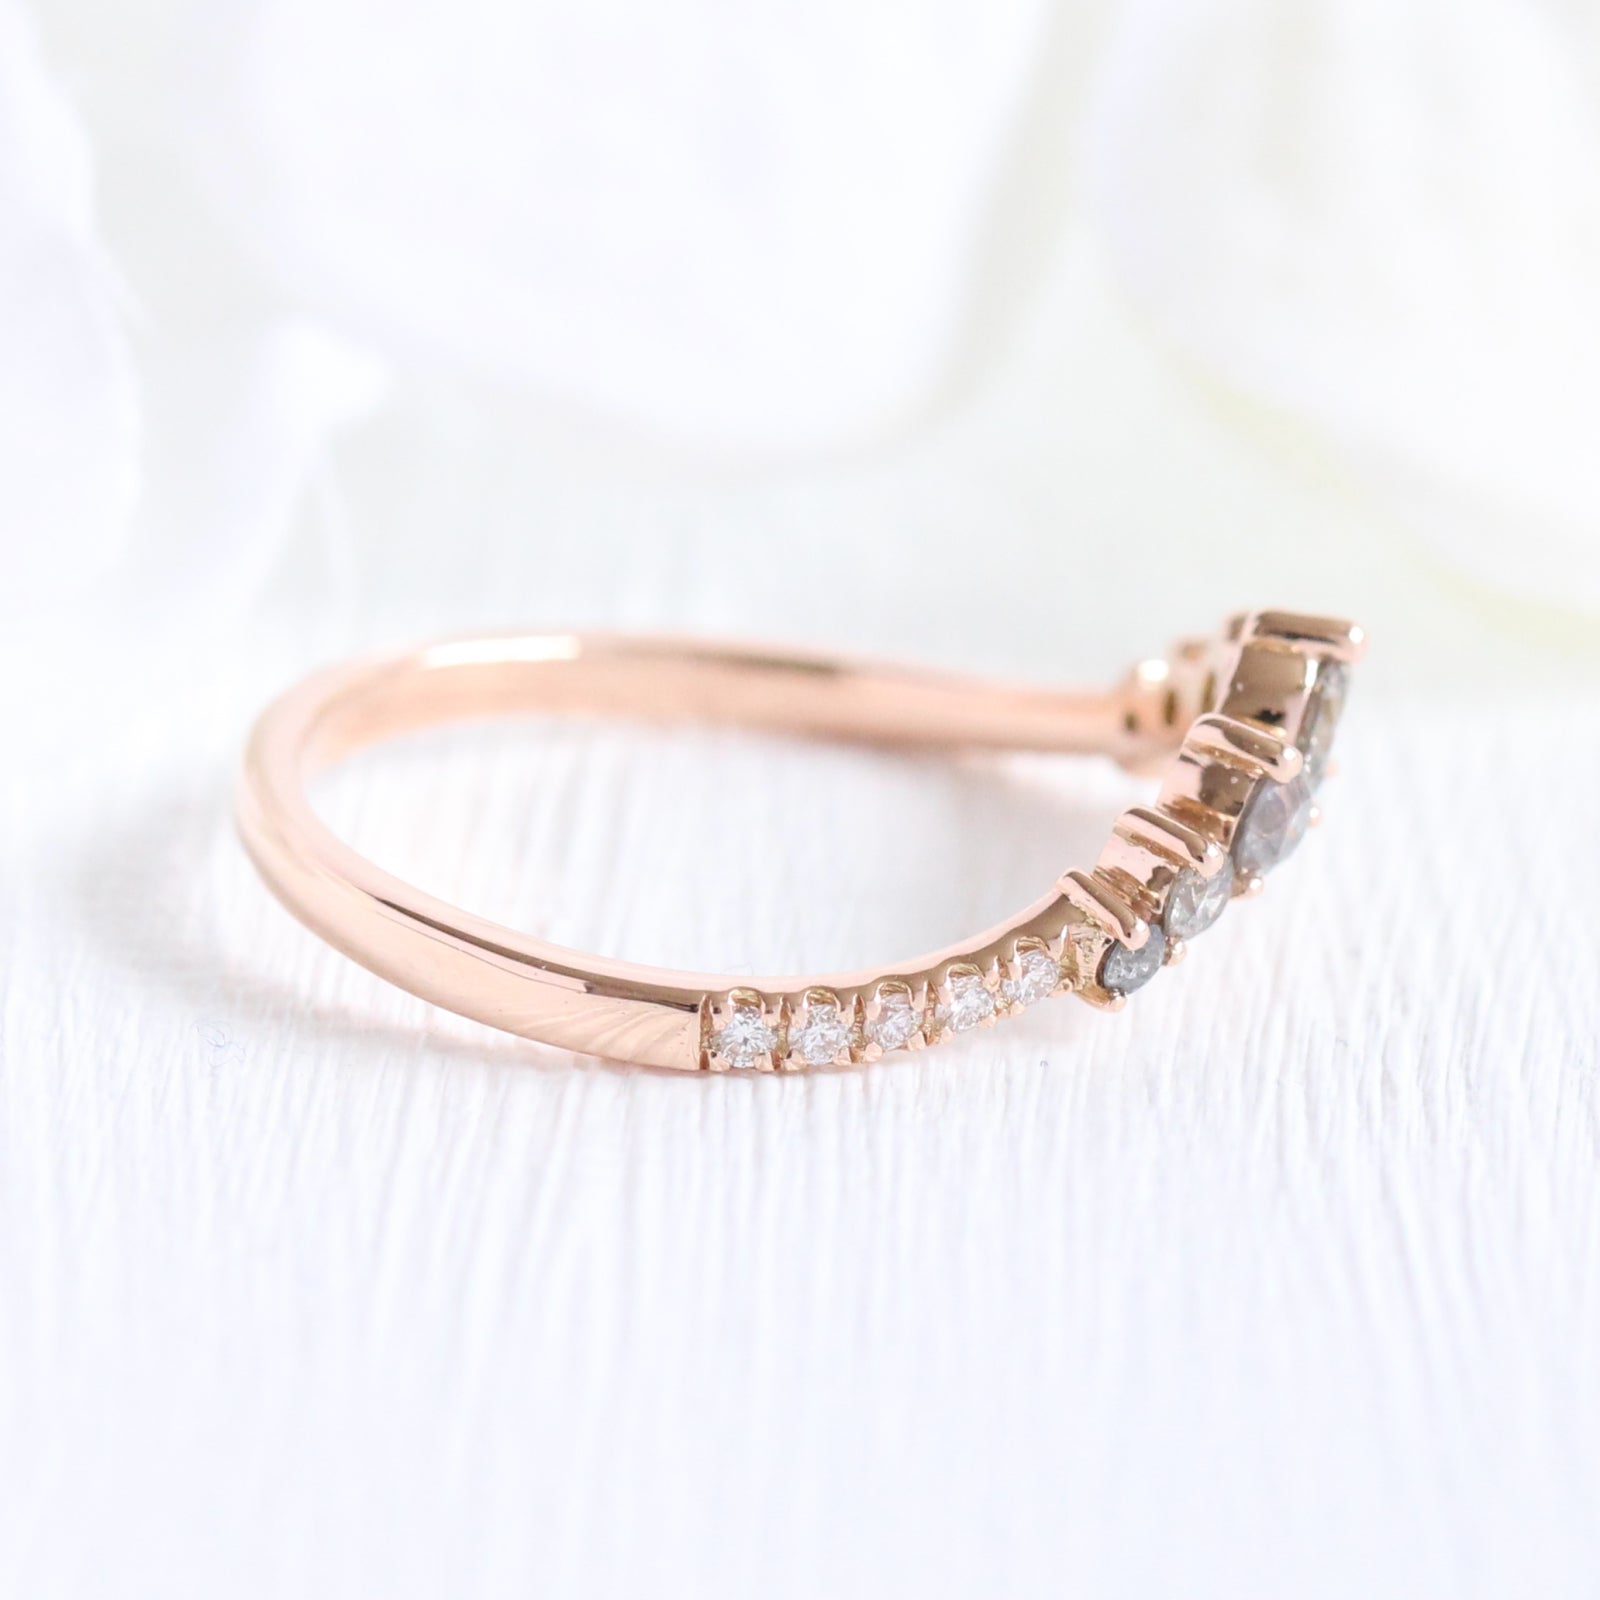 Salt and Pepper Diamond Wedding Ring in 14k Rose Gold Curved Pave Band, Size 5.5